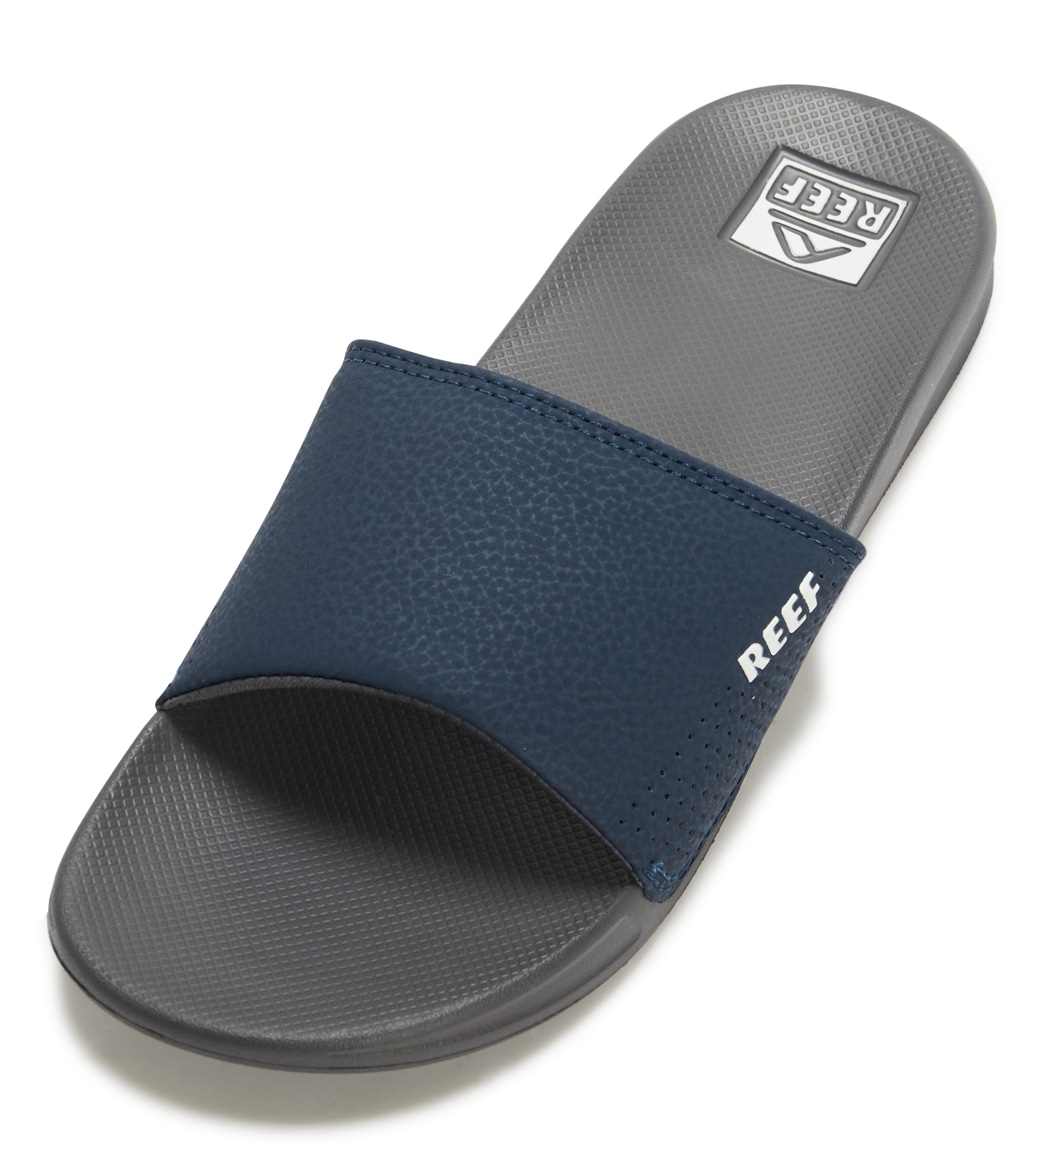 Reef One Slides Sandals - Navy/White 10 - Swimoutlet.com